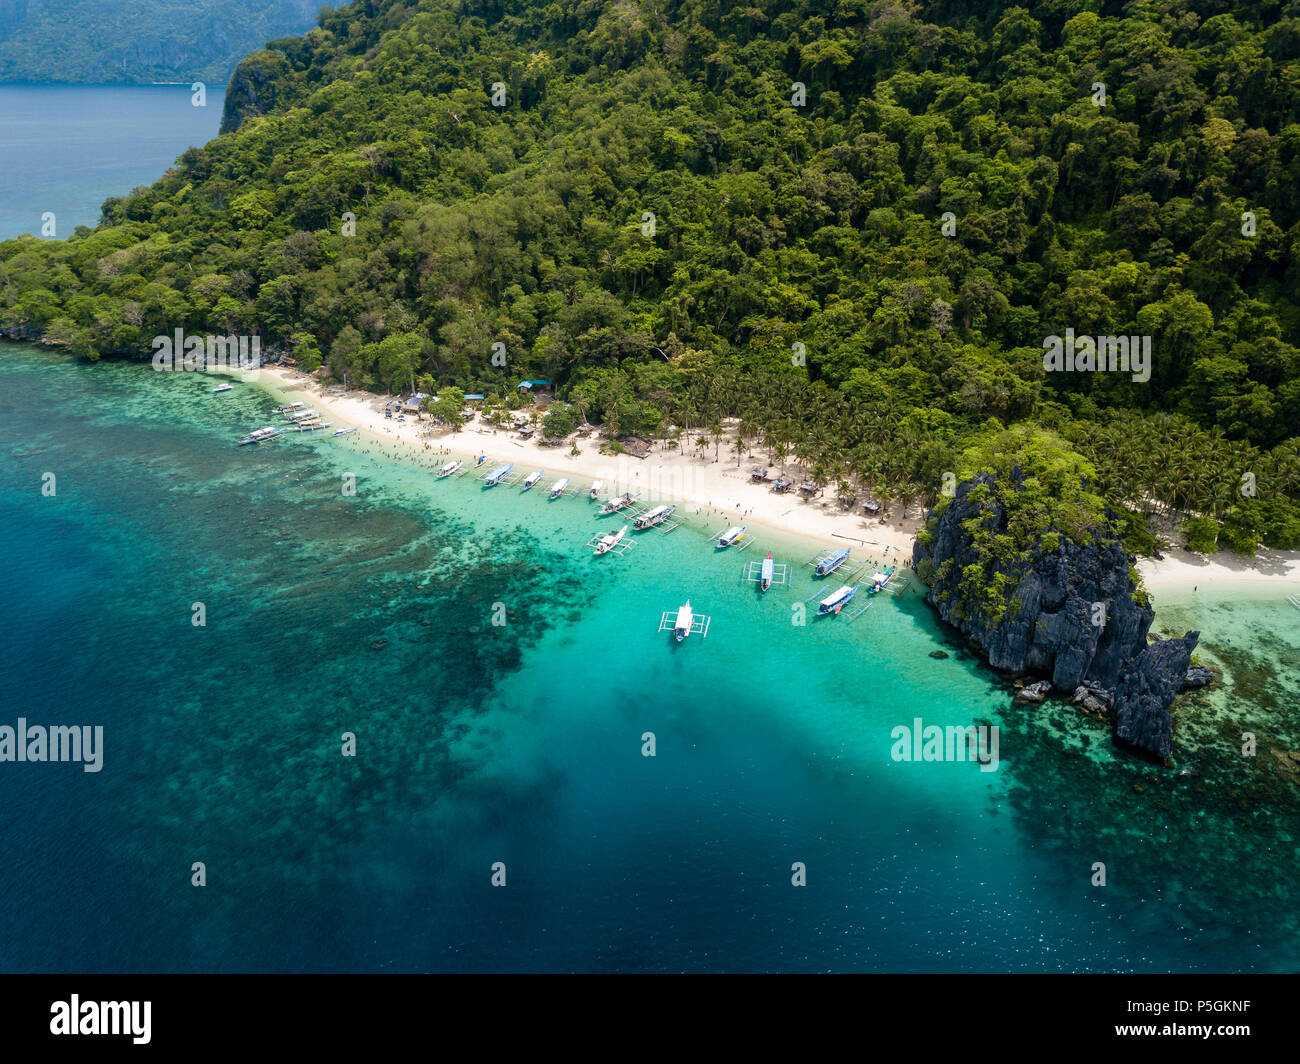 Aerial drone view of traditional Banca boats and coral reef surrounding a scenic tropical sandy beach (7 Commando Beach, El Nido) Stock Photo